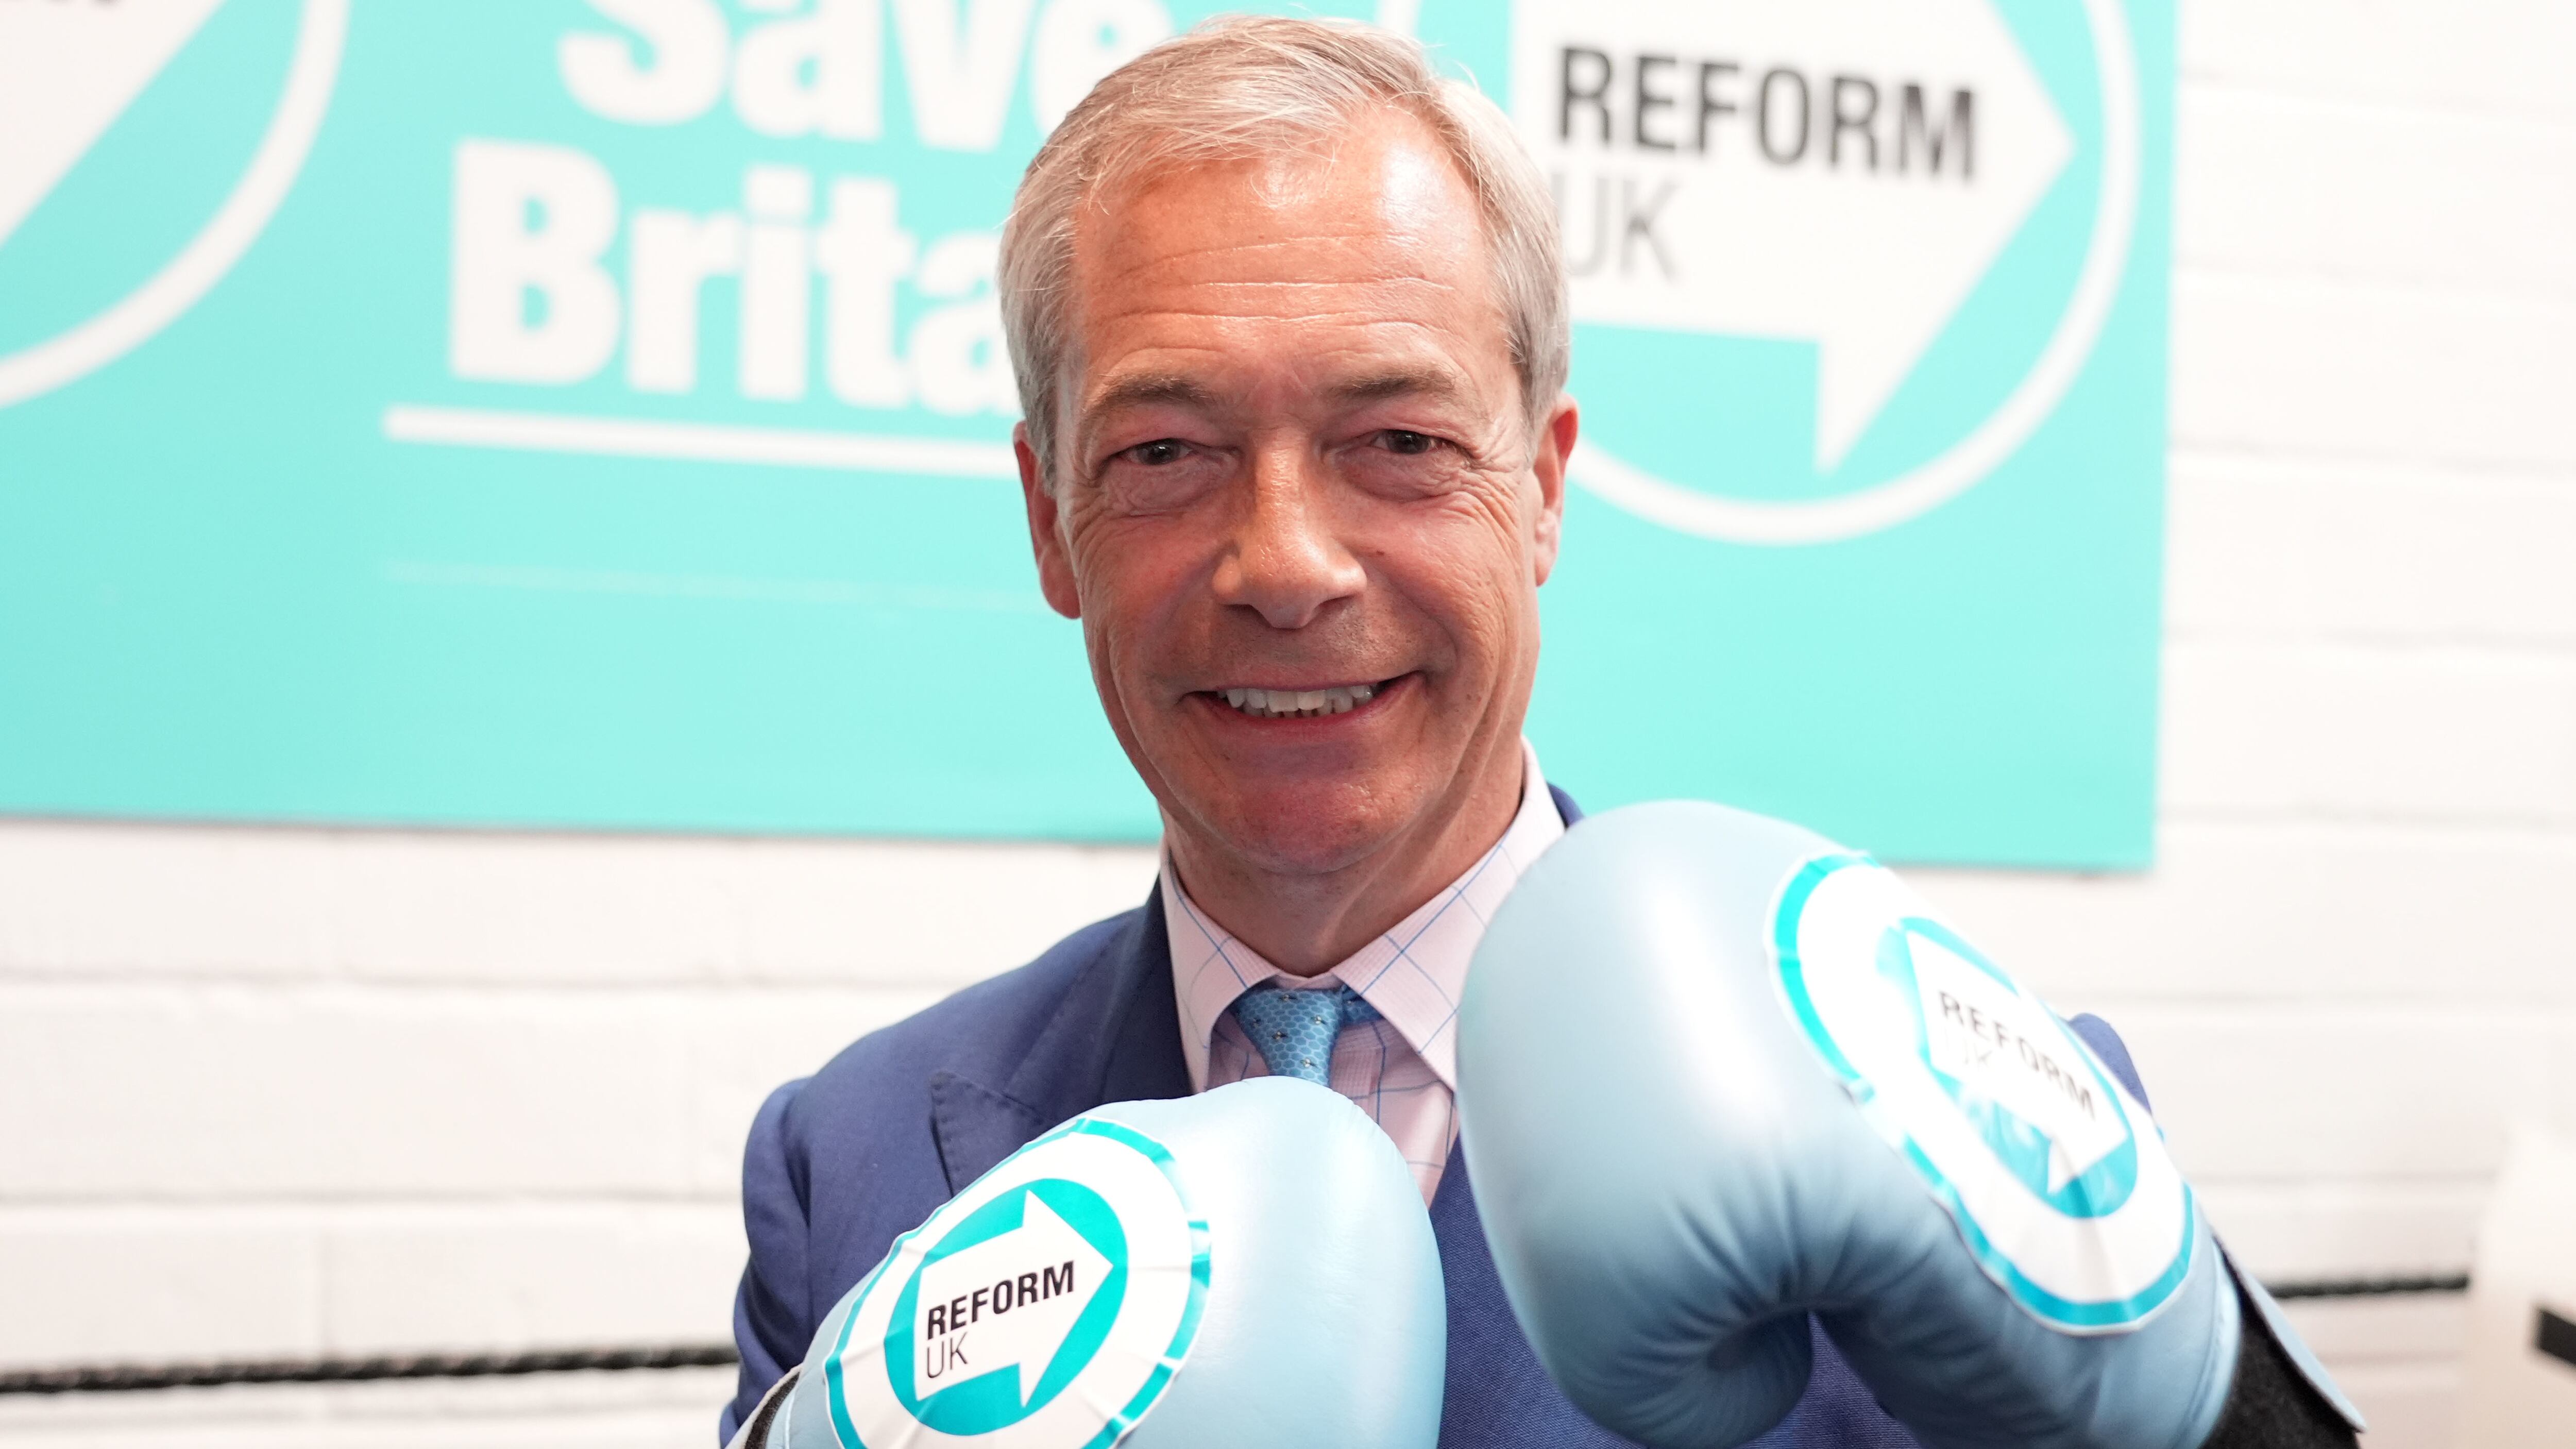 Reform UK leader Nigel Farage wearing boxing gloves at a boxing gym in Clacton